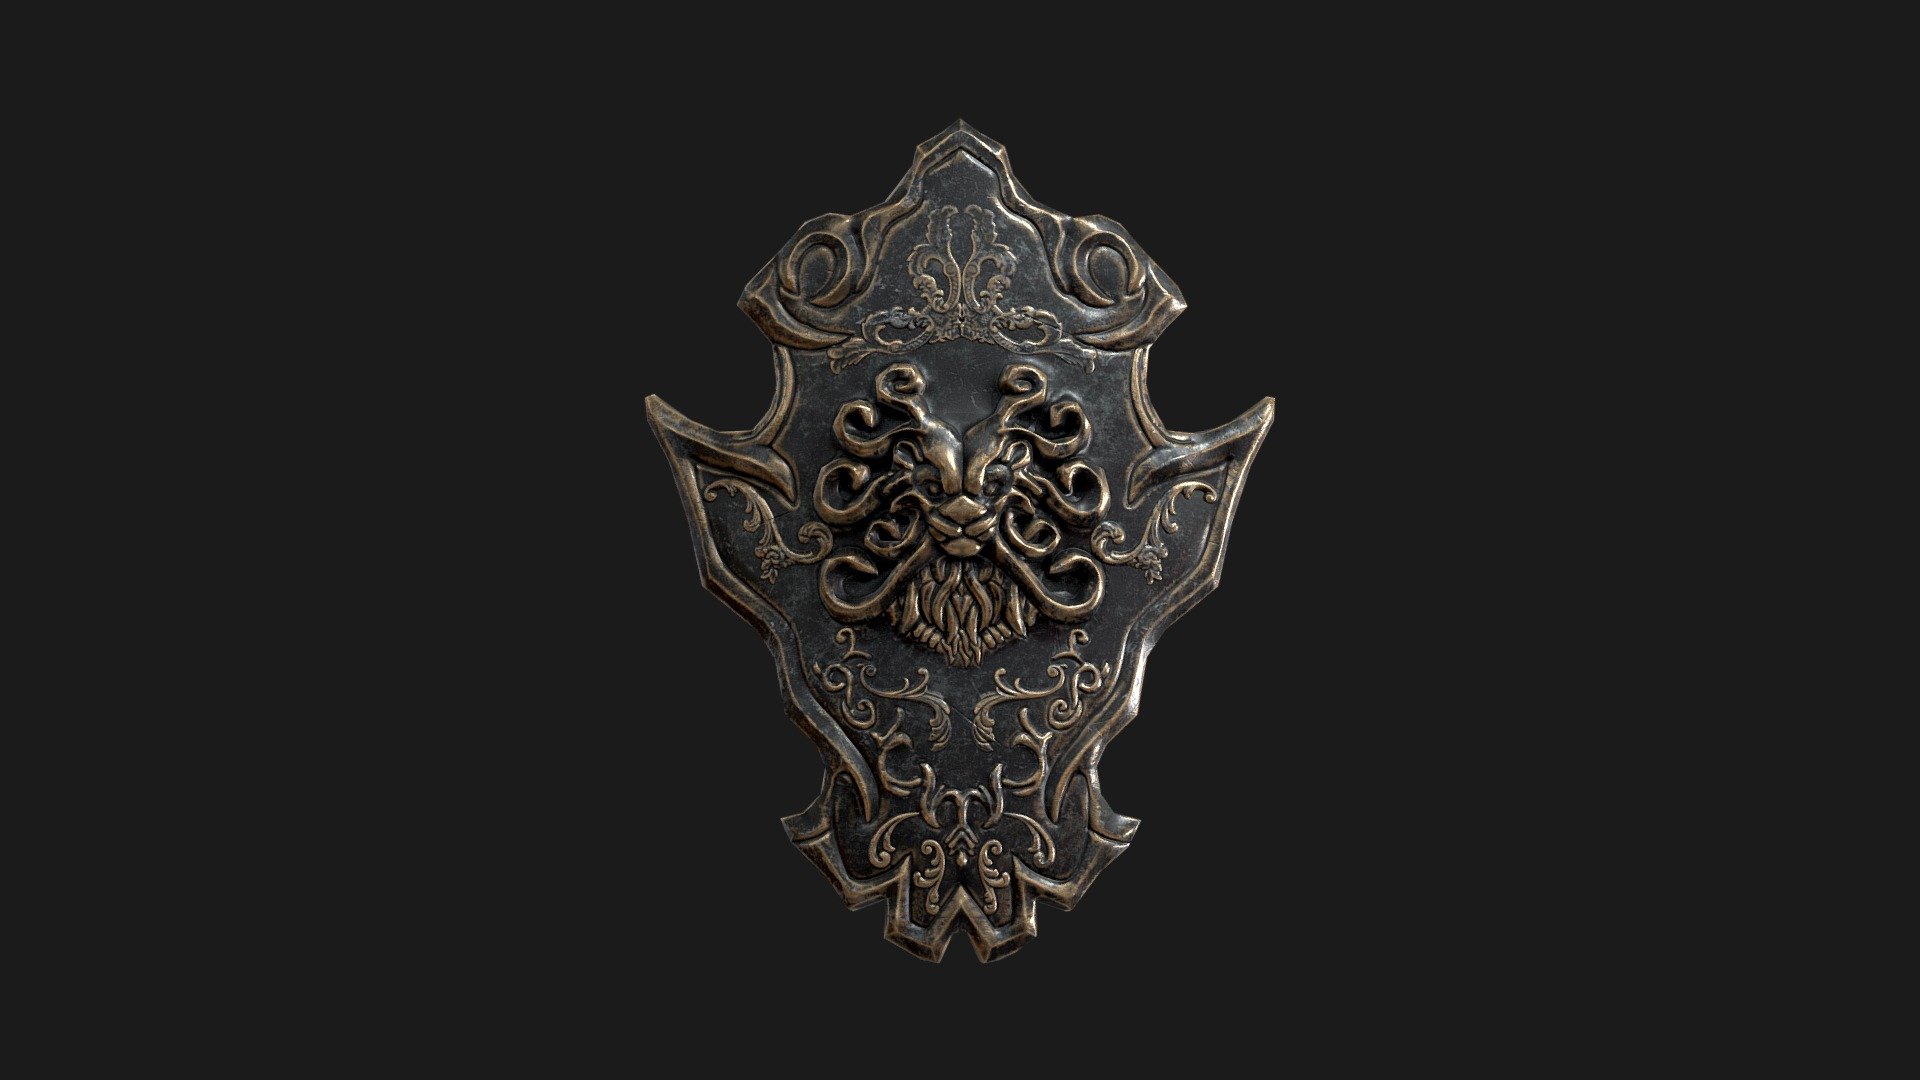 Lion_Shield

2048x2048 JPG texture

Textures include:

-Base Color

-Normal

-Roughness

-Metallic

-AO

I hope you like it 3d model